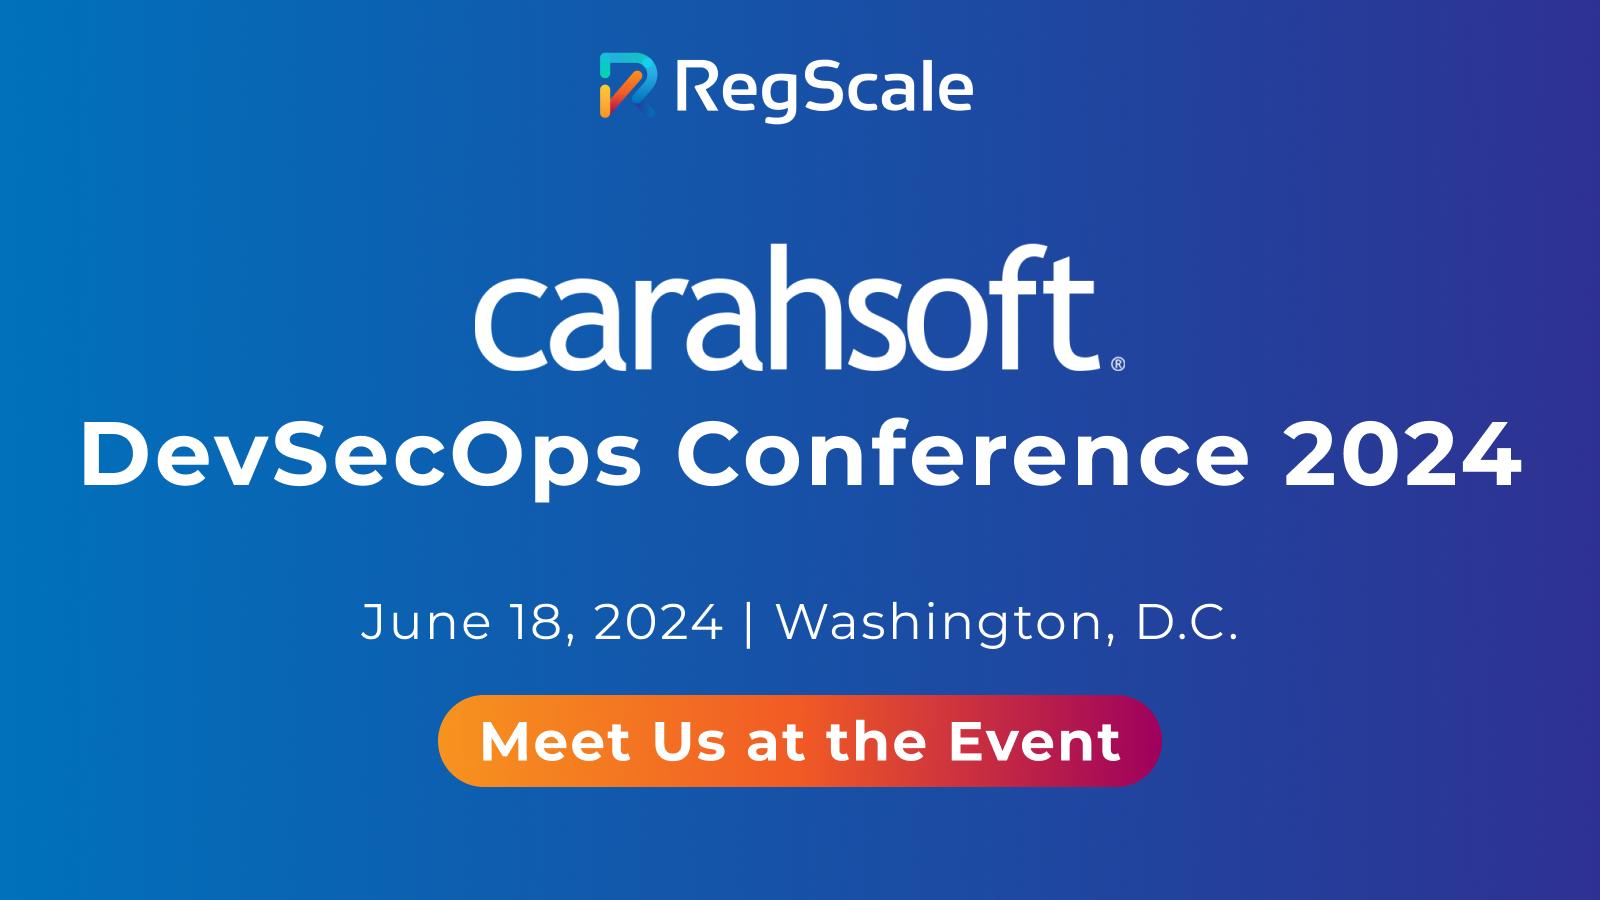 RegScale logo. Carahsoft logo and DevSecOps Conference 2024. June 18th, 2024 in Washington D.C.. Meet us at the event button.